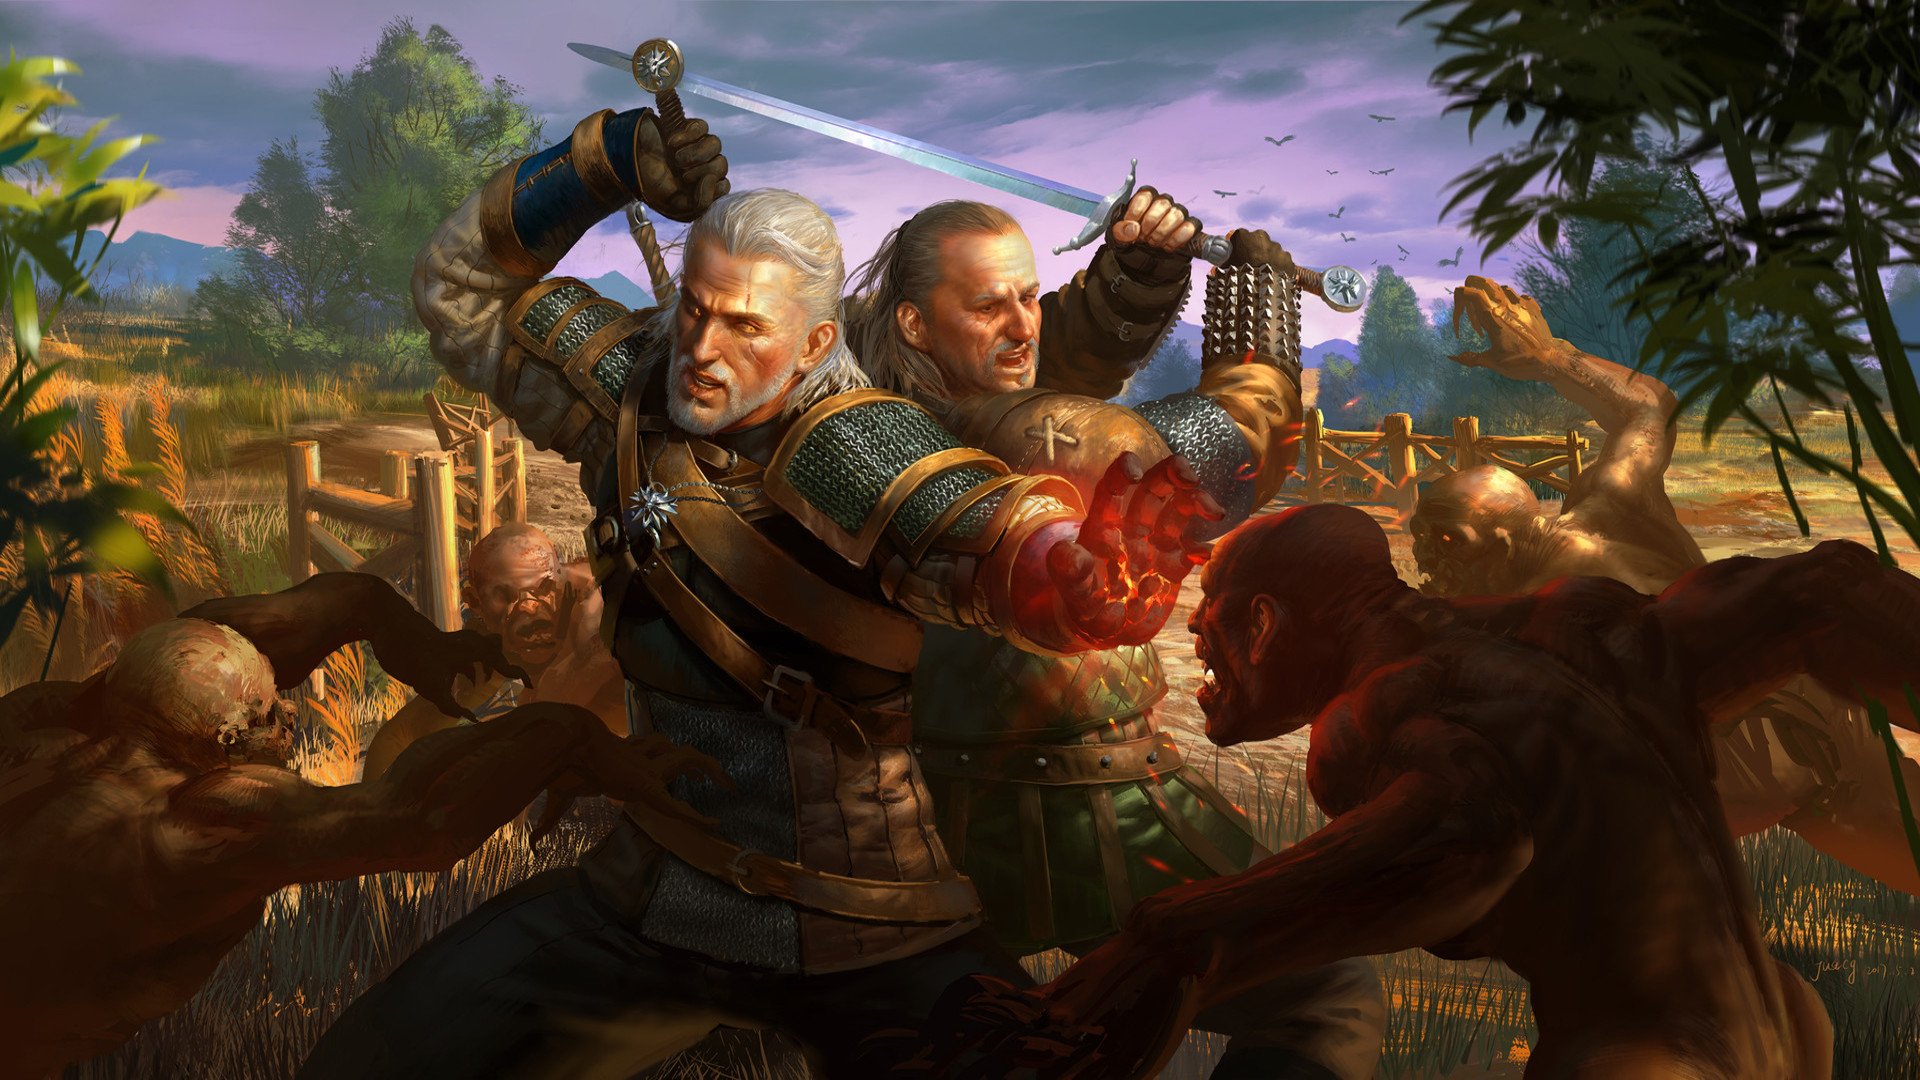 Download Vesemir (The Witcher) wallpaper for mobile phone, free Vesemir (The Witcher) HD picture